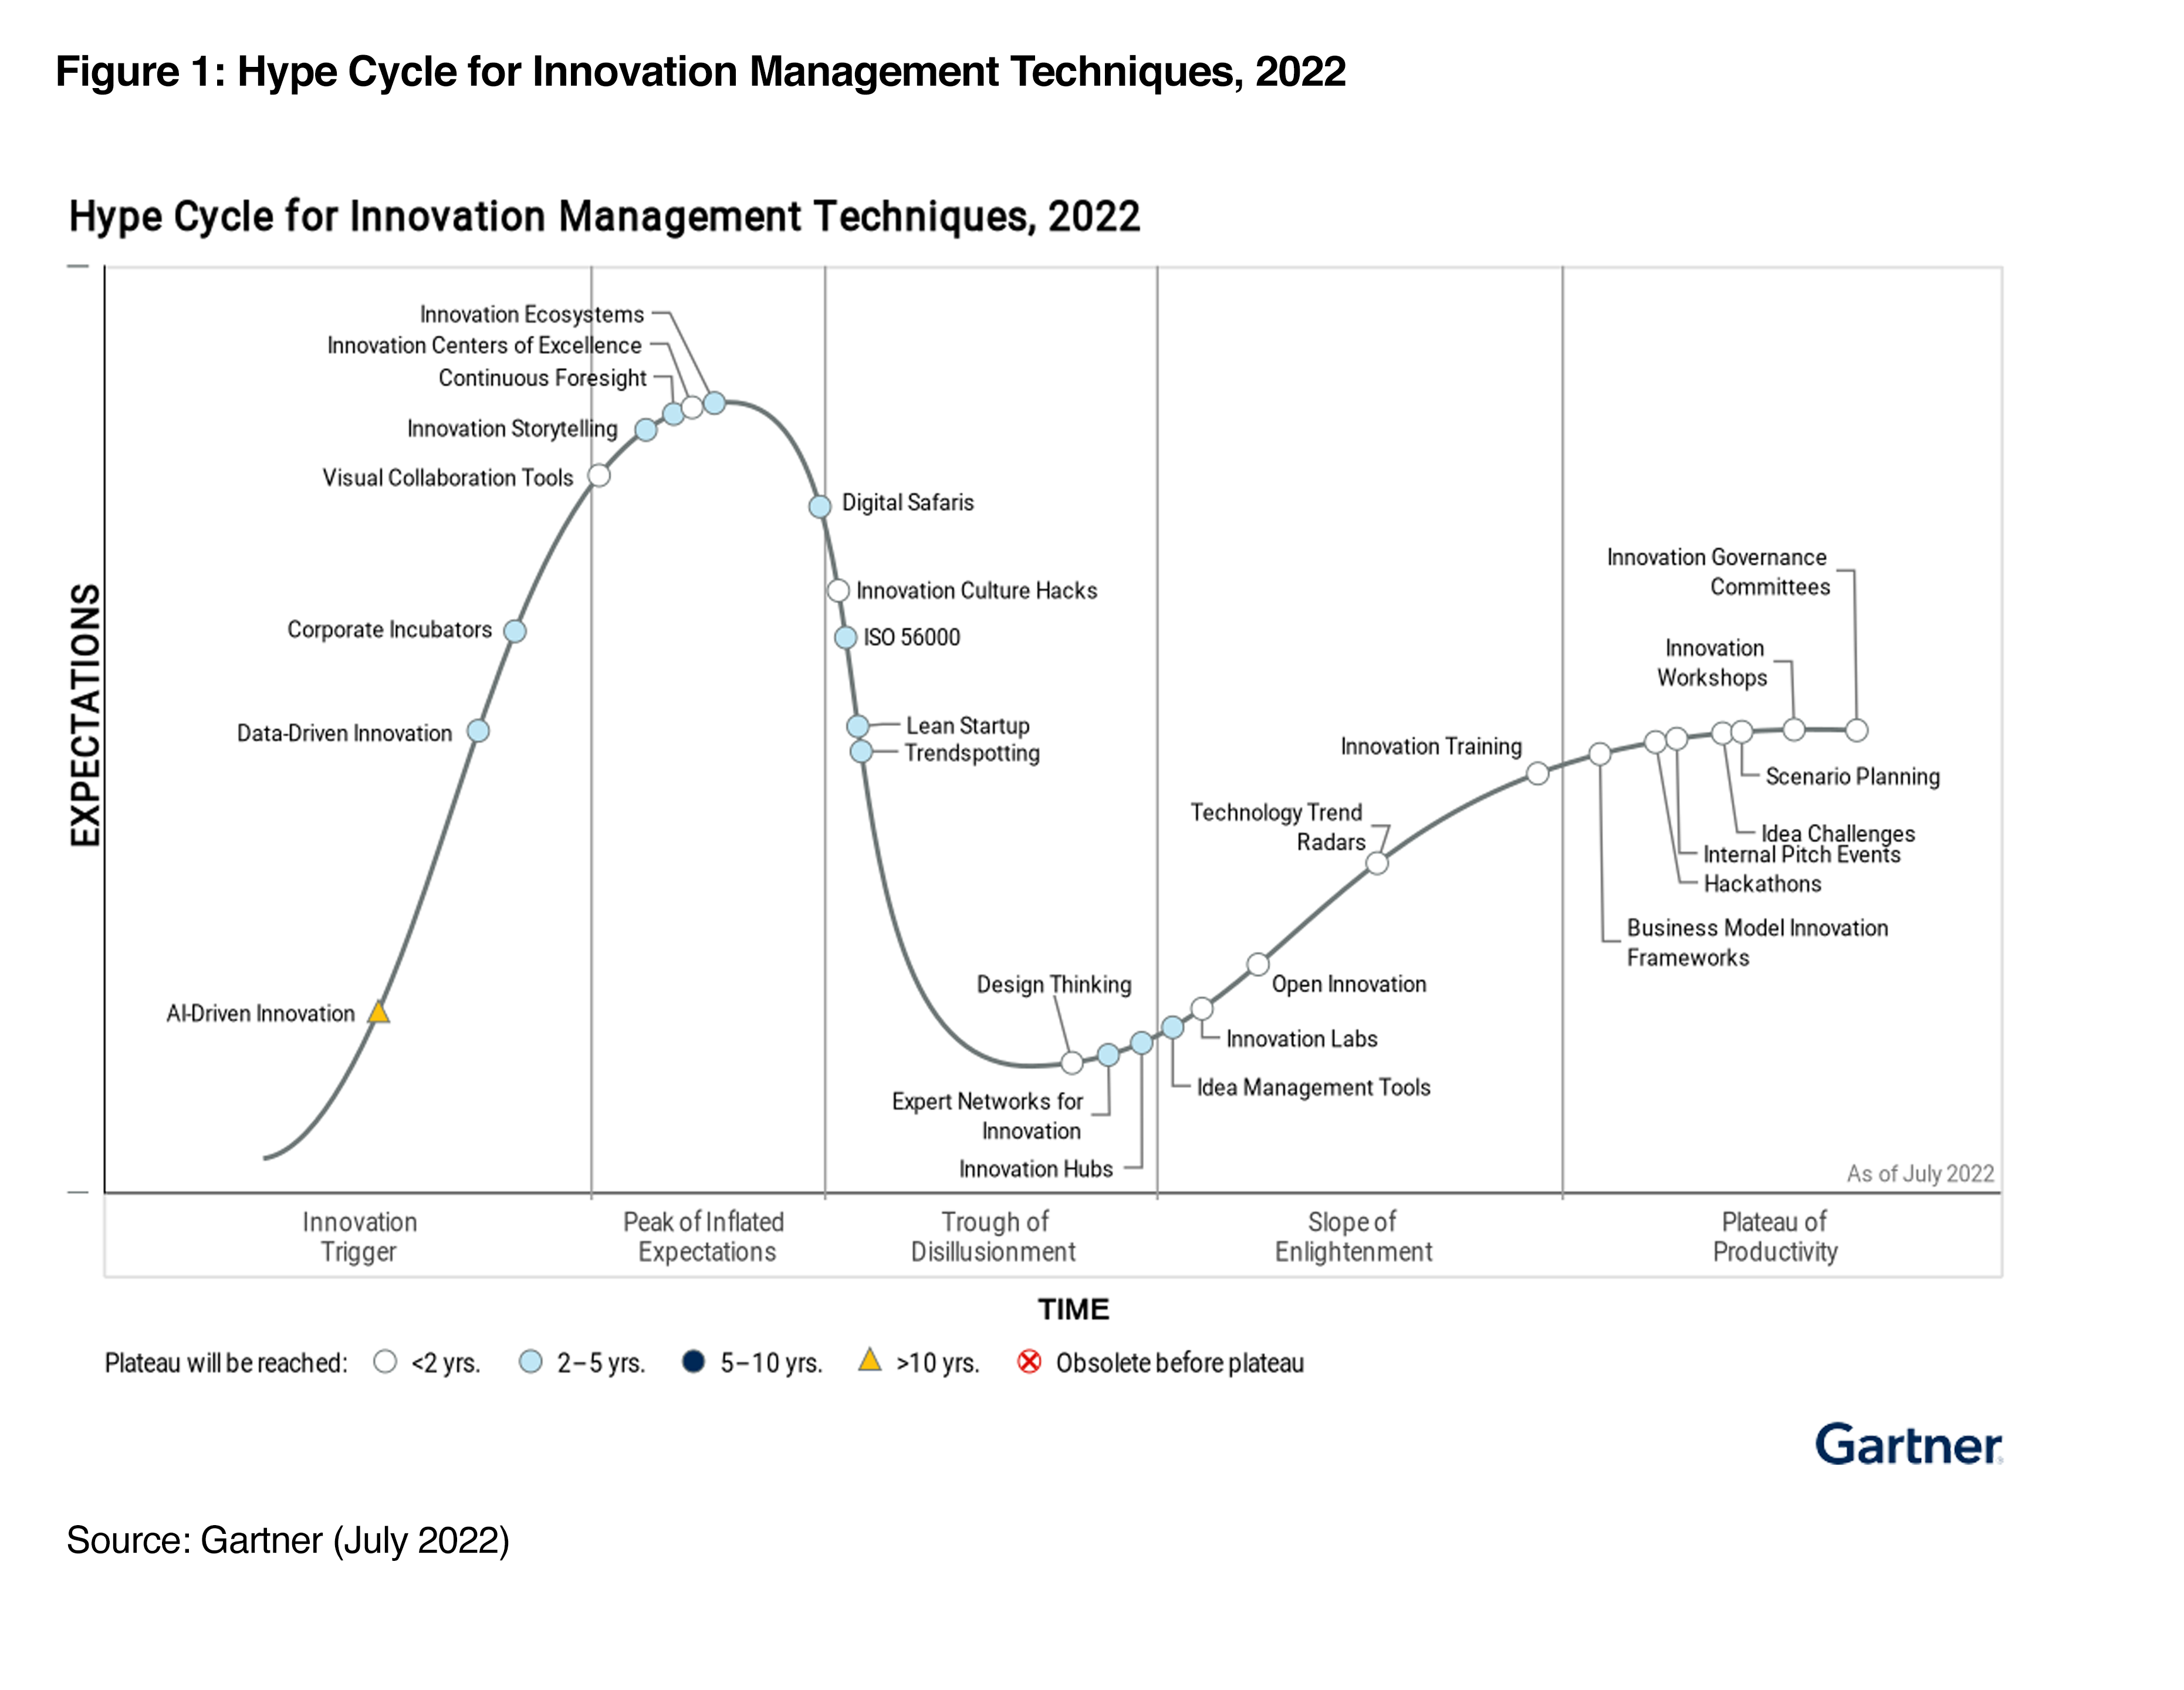 Featured image: ITONICS Mentioned in Gartner® Hype Cycle™ for Innovation Management Techniques 2022